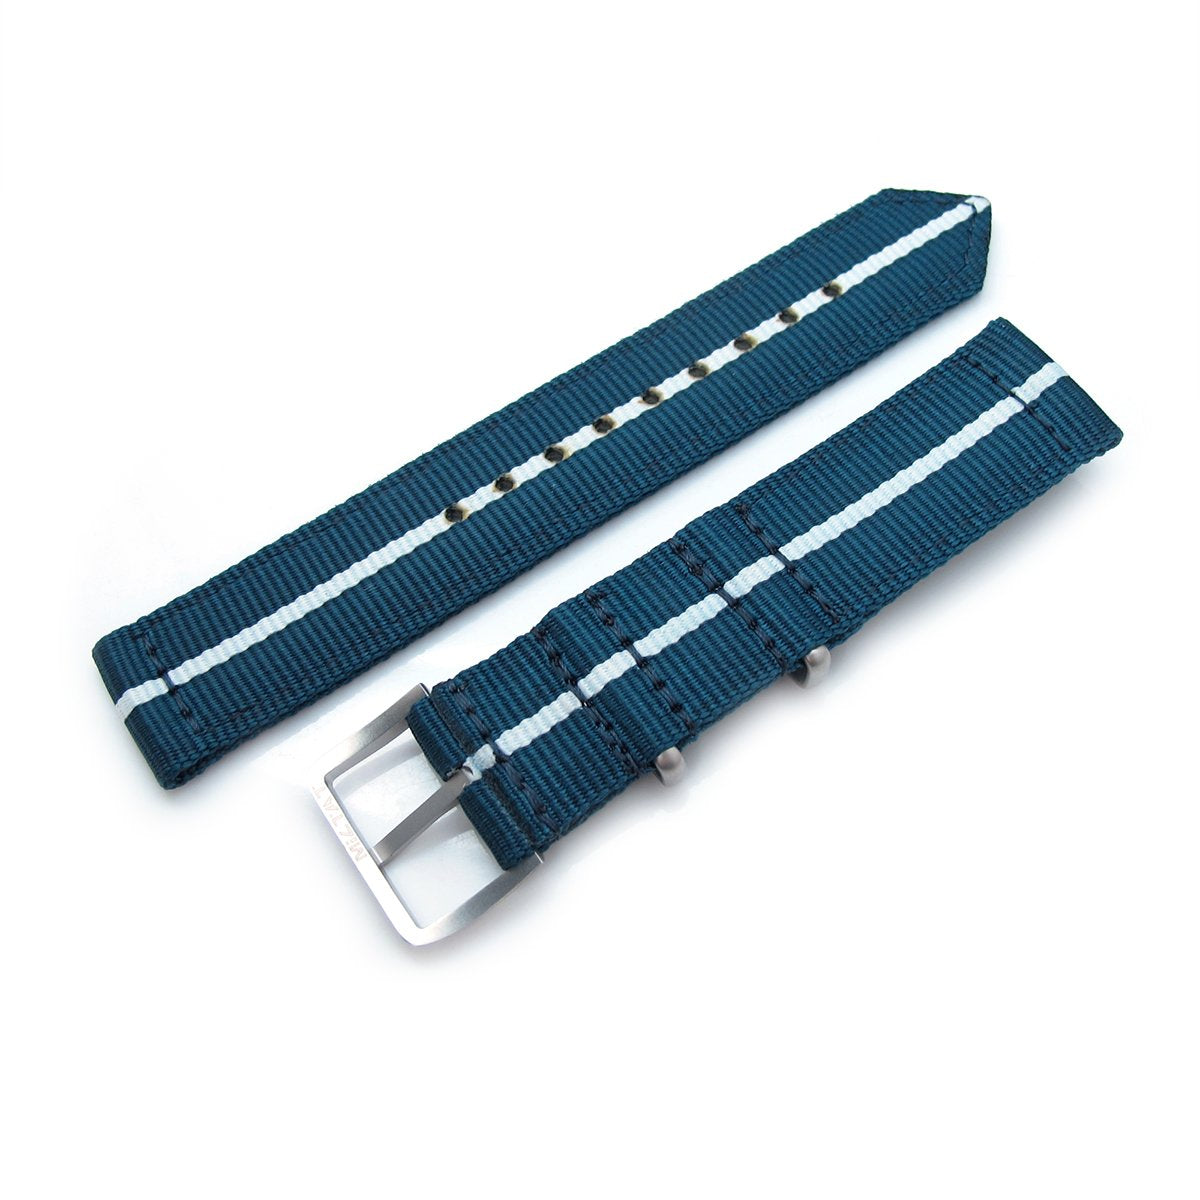 20mm Two Piece WW2 G10 Nylon Navy Blue & White Brushed Buckle Strapcode Watch Bands